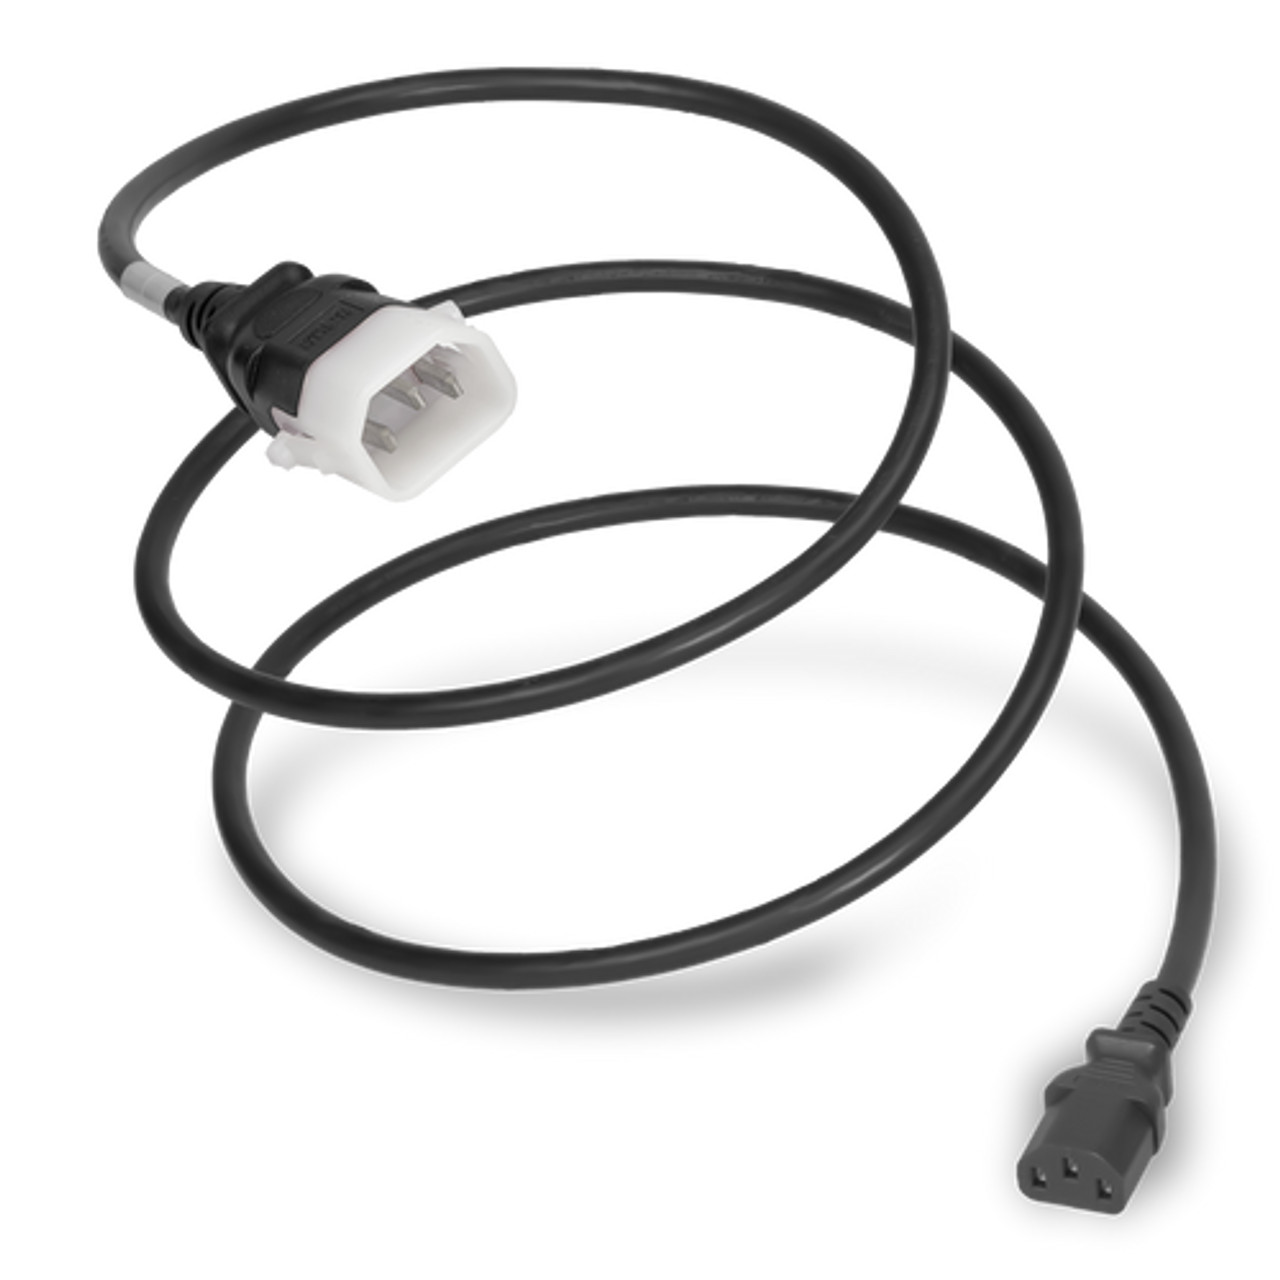 15 amp 3 IEC Cable, 3ft Compact Power Accessories